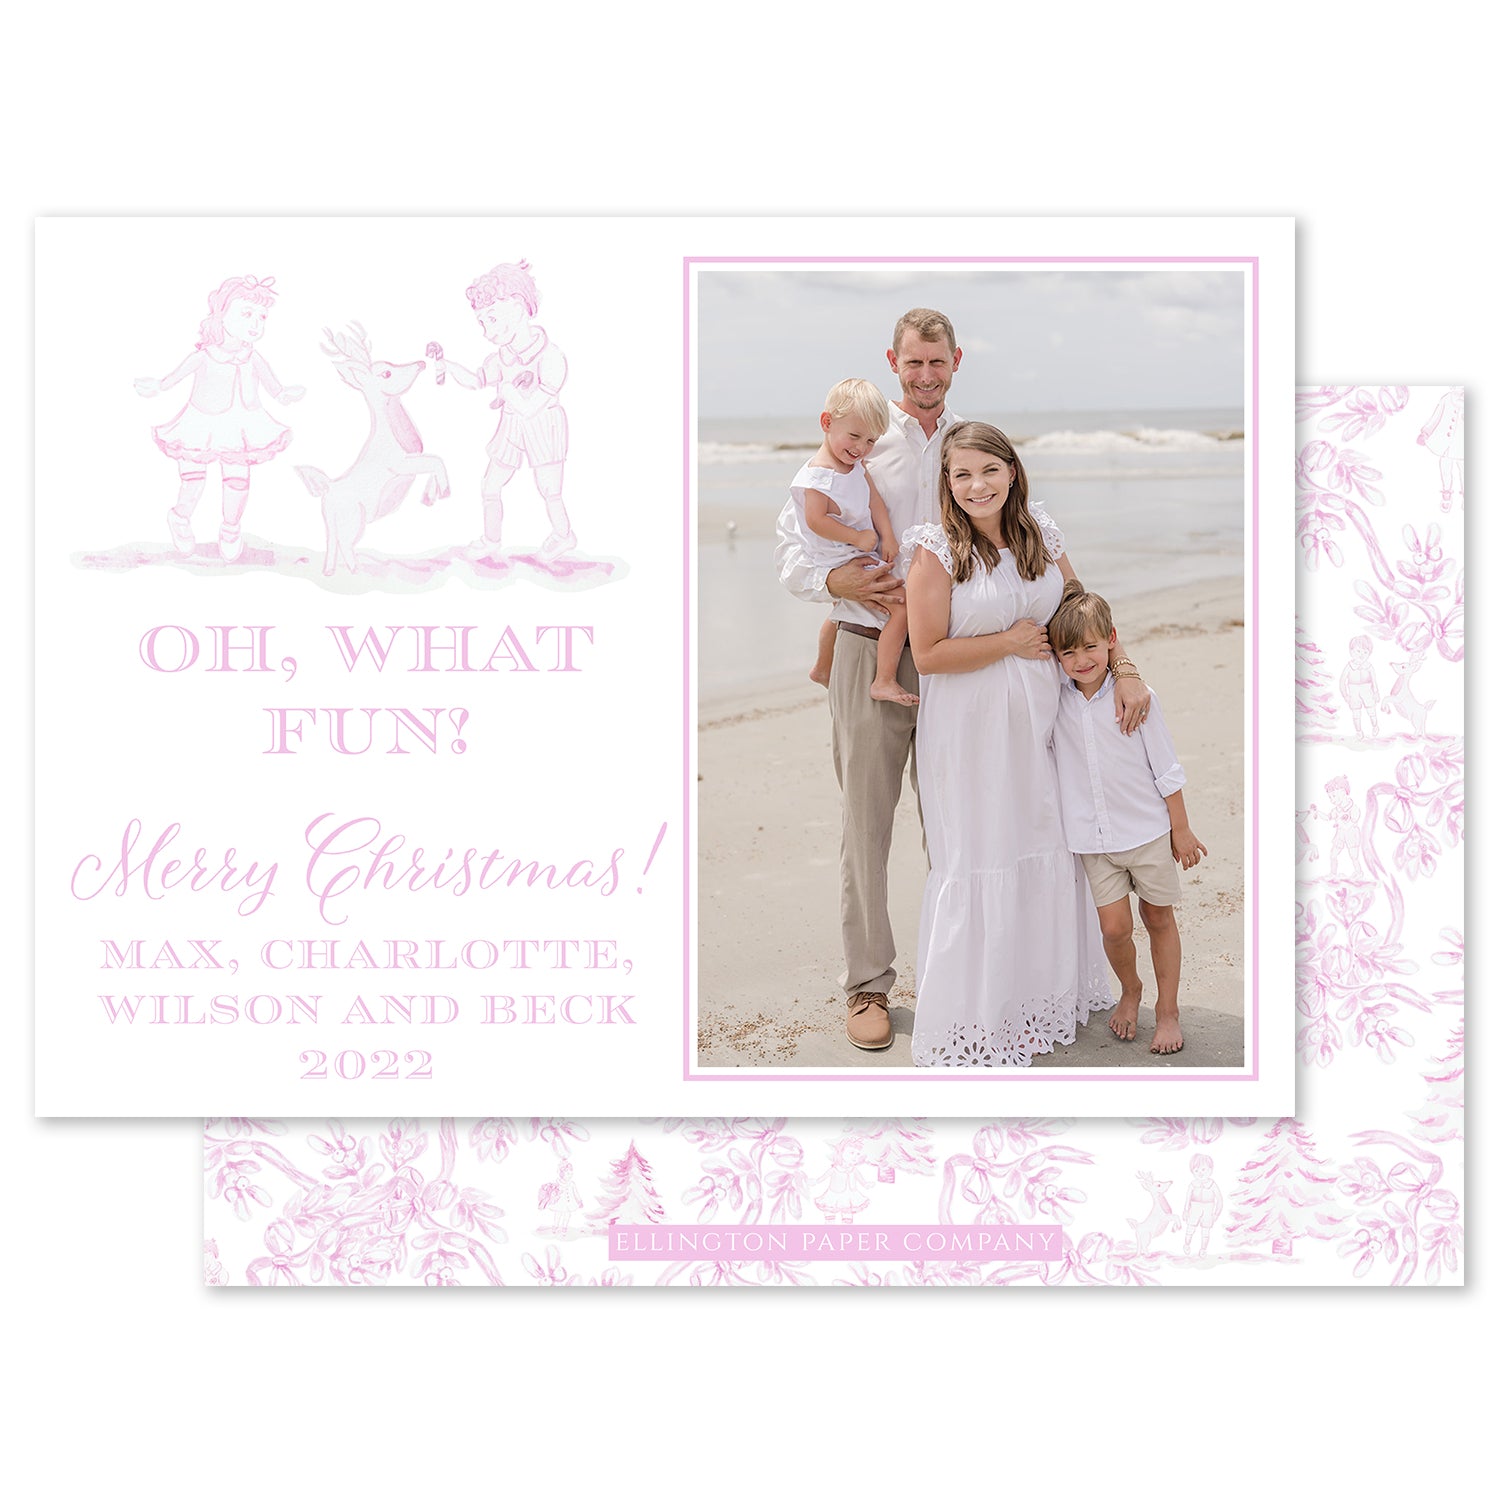 Oh, What Fun Holiday Photo Card, Pink